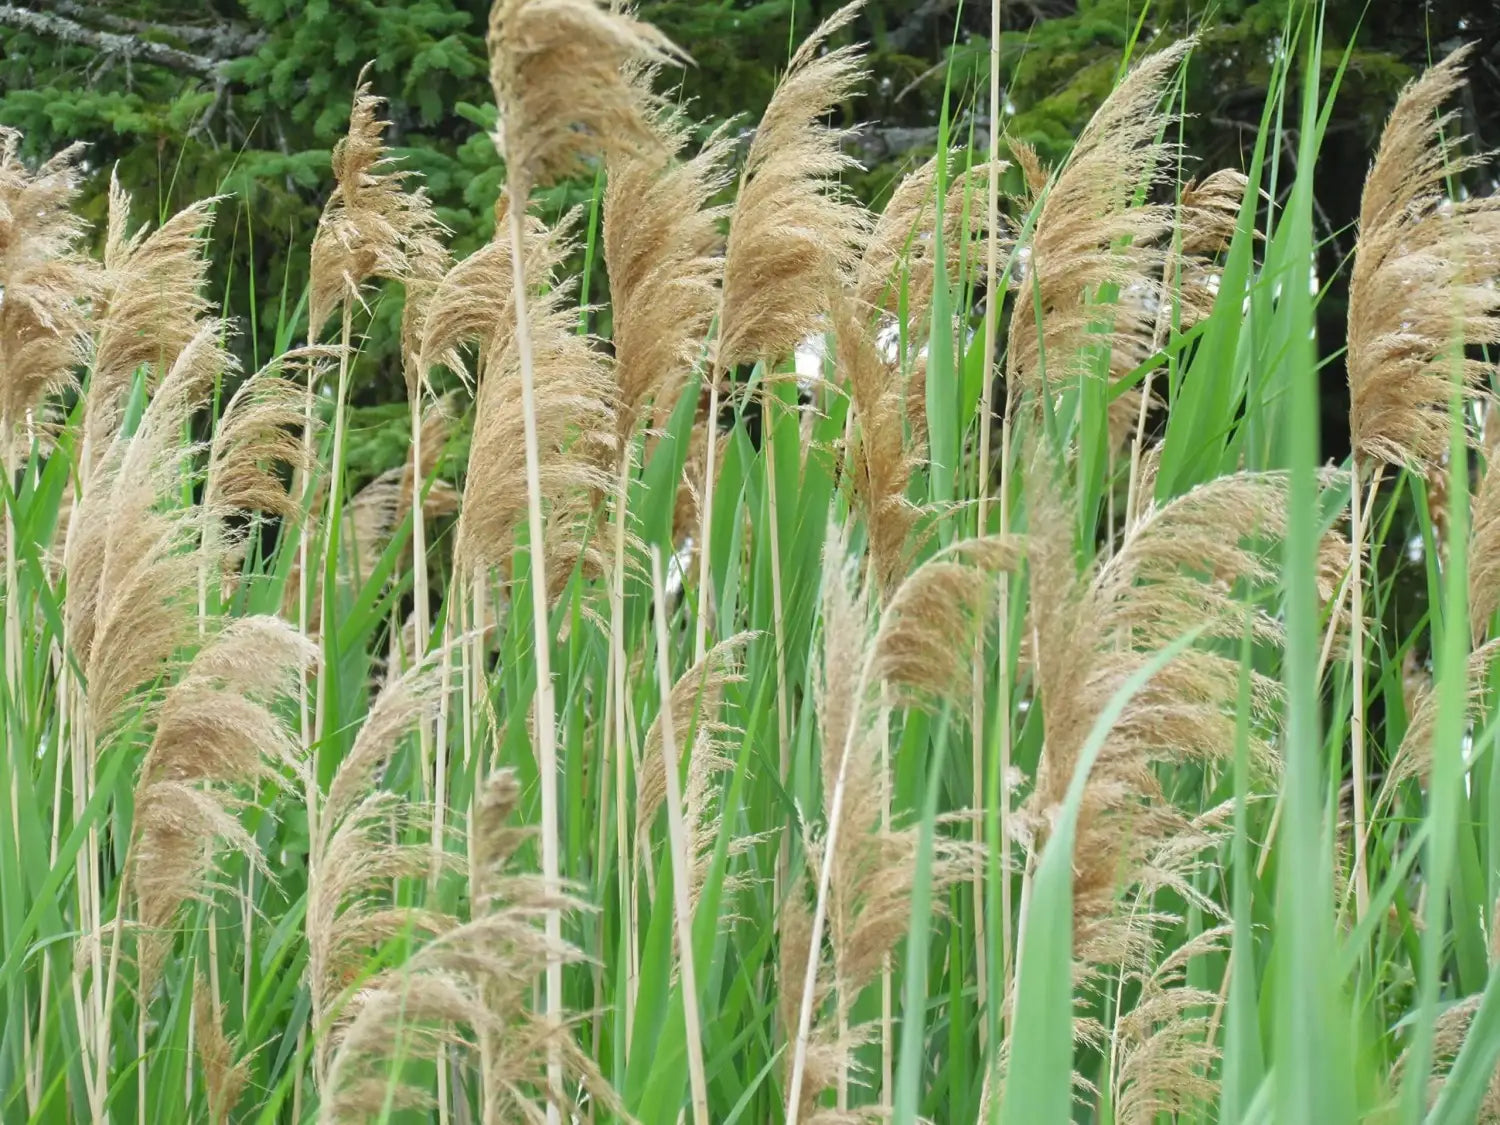 Common Reed 2000 Seeds for Planting - Perennial Reed Grasses - Communis Phragmites Australis Seeds